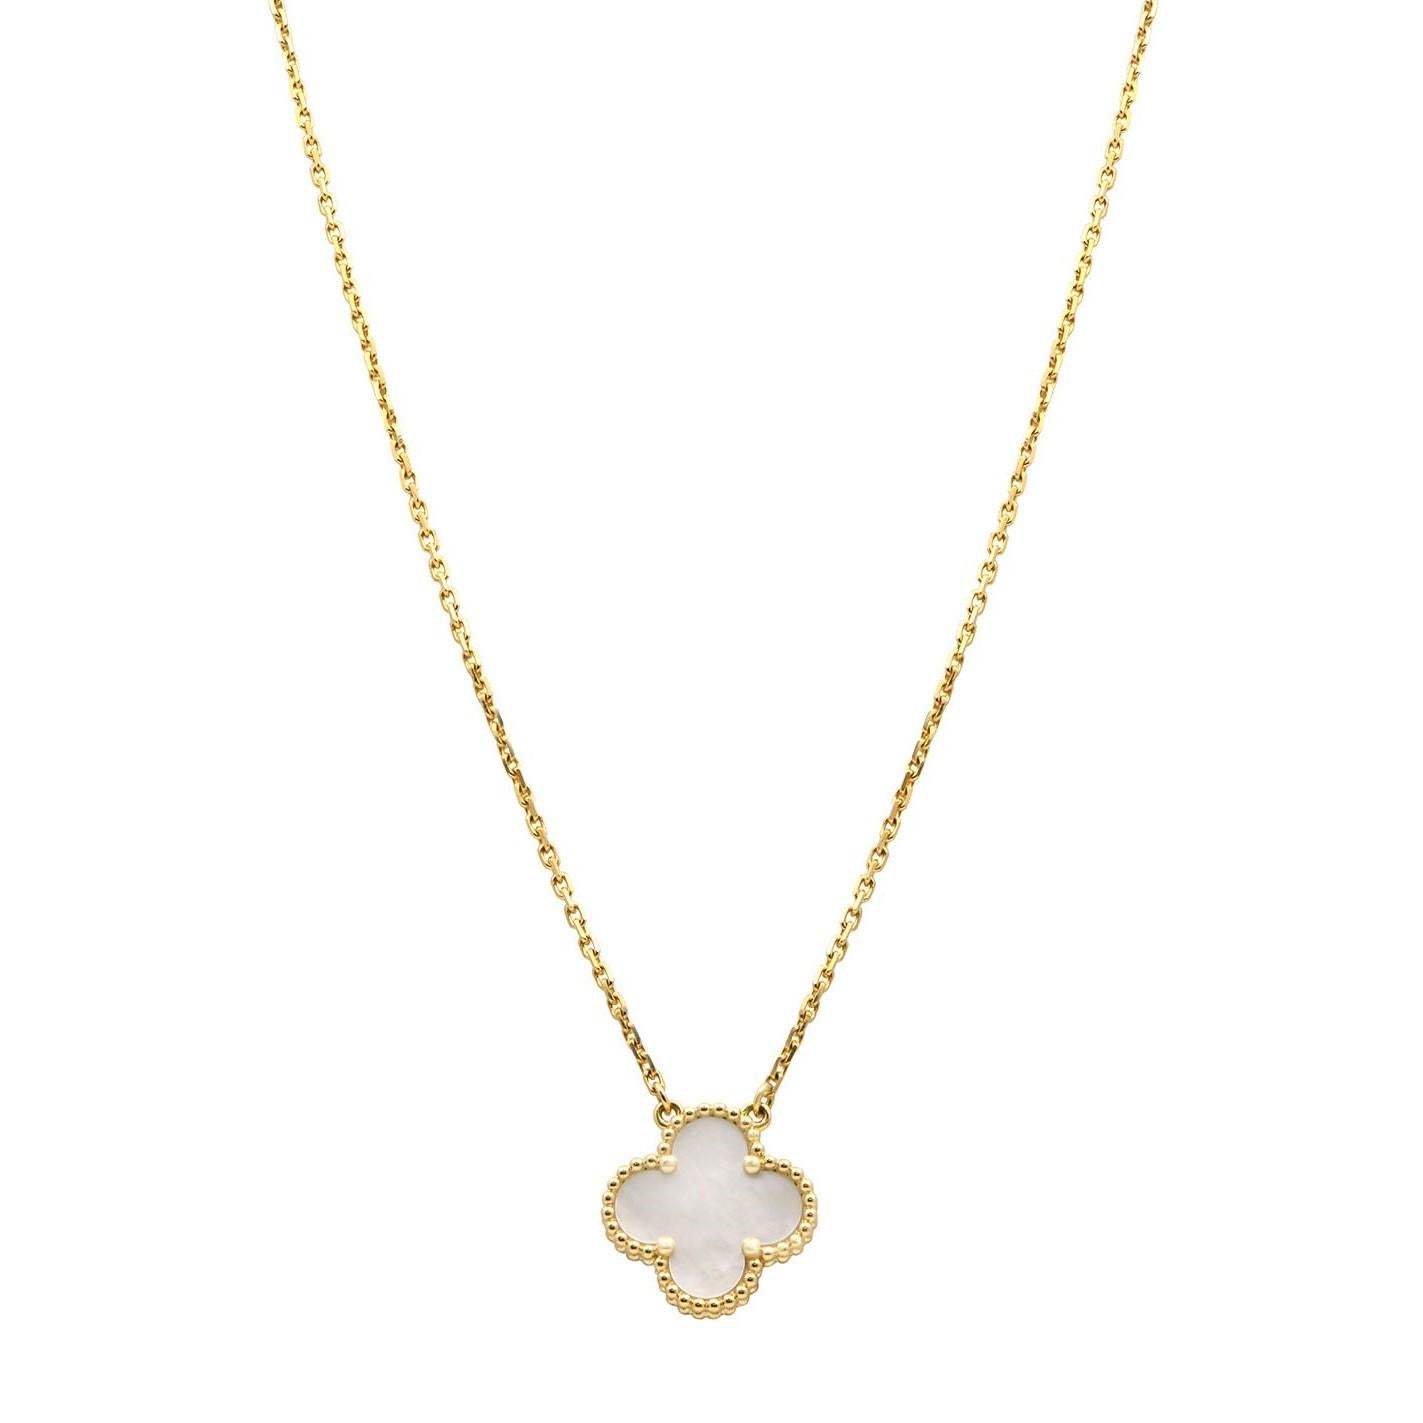 Van Cleef & Arples Vintage Alhambra pendant, 18K yellow gold, one white mother-of-pearl motif. Hallmark clasp. Chain length: 16.54 inches. Excellent pre-owned condition. Original box and papers are not included.